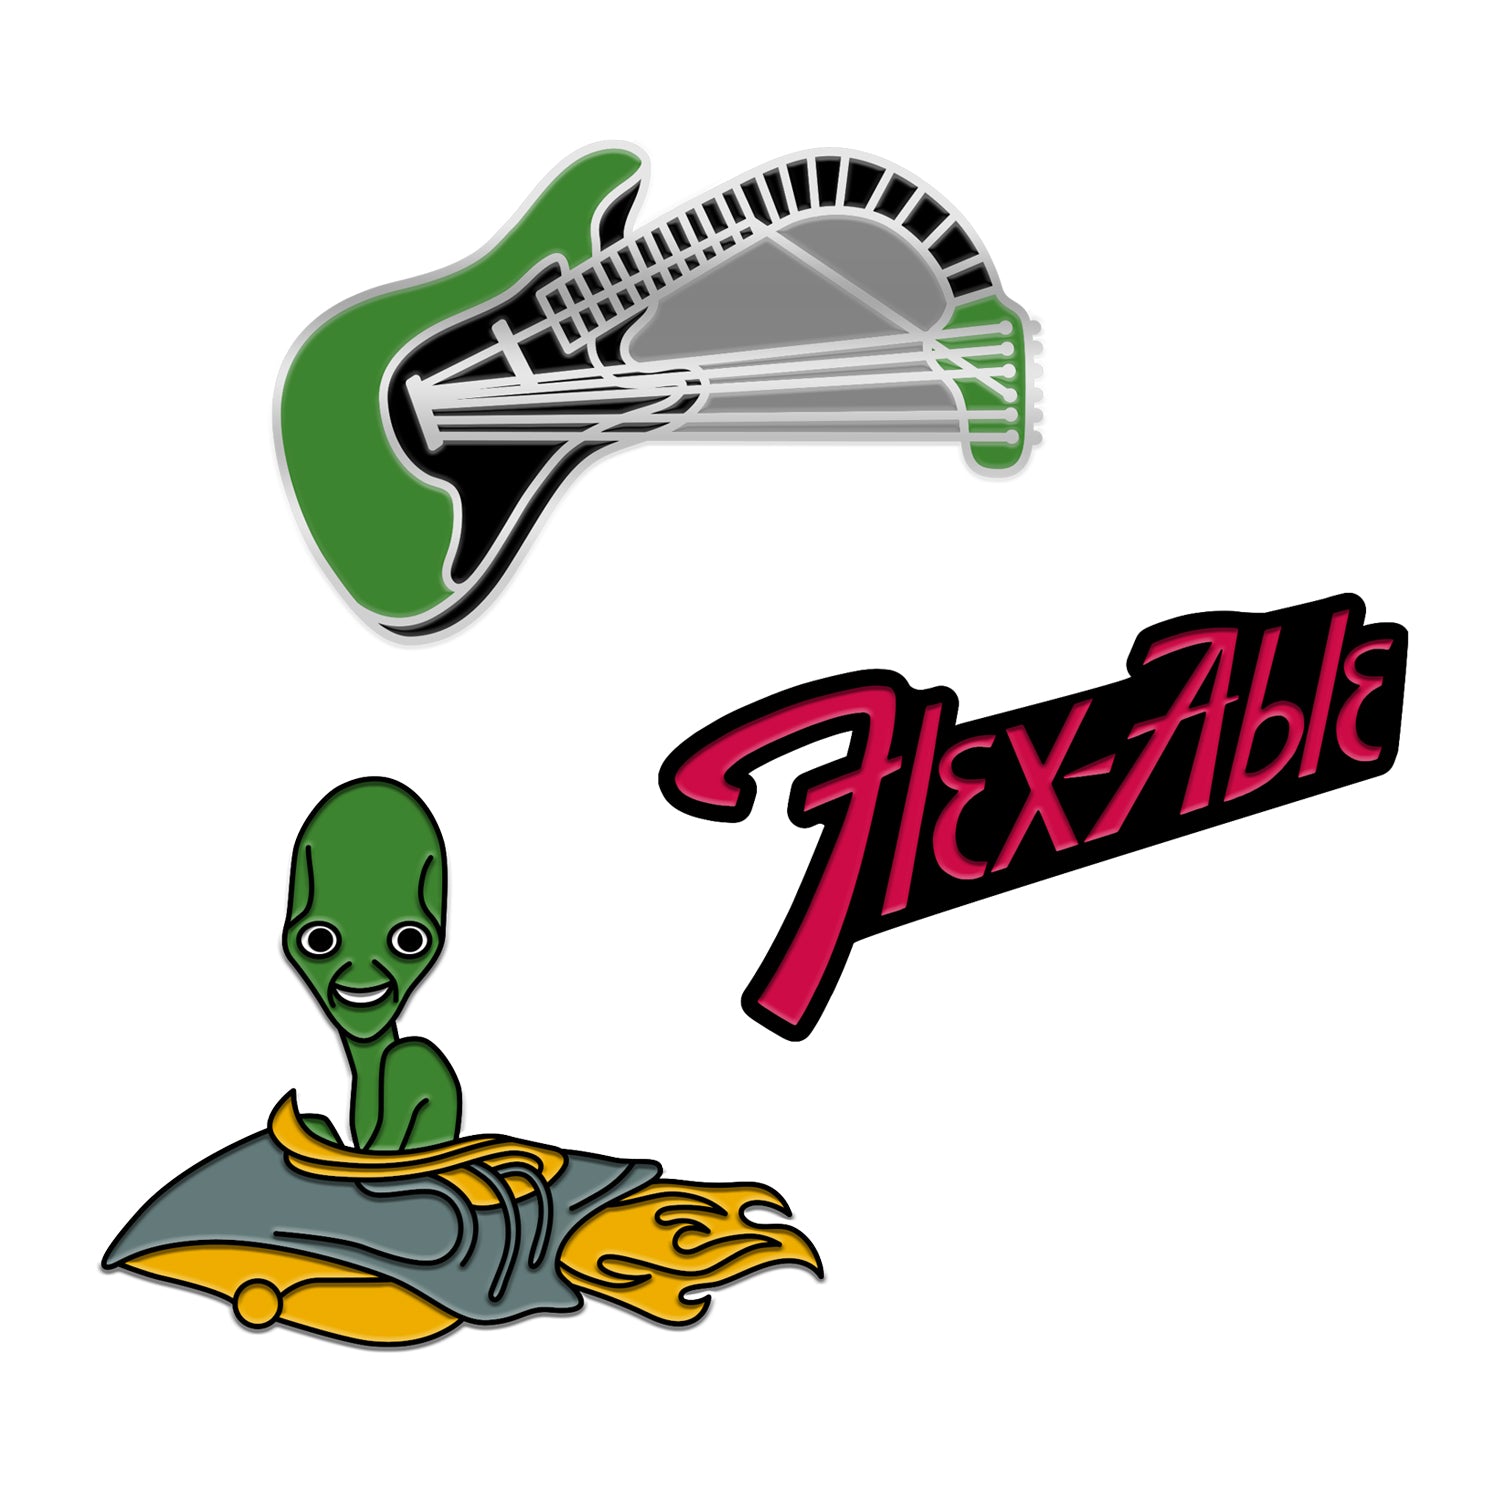 Three enamel pins against white background. One pin is a green electric guitar with a black neck and white strings. The neck of the guitar is bent. Another is a green alien in a grey and yellow rocketship with fire coming out of the back, and the other is a black pin with the word "flex-able" in red.